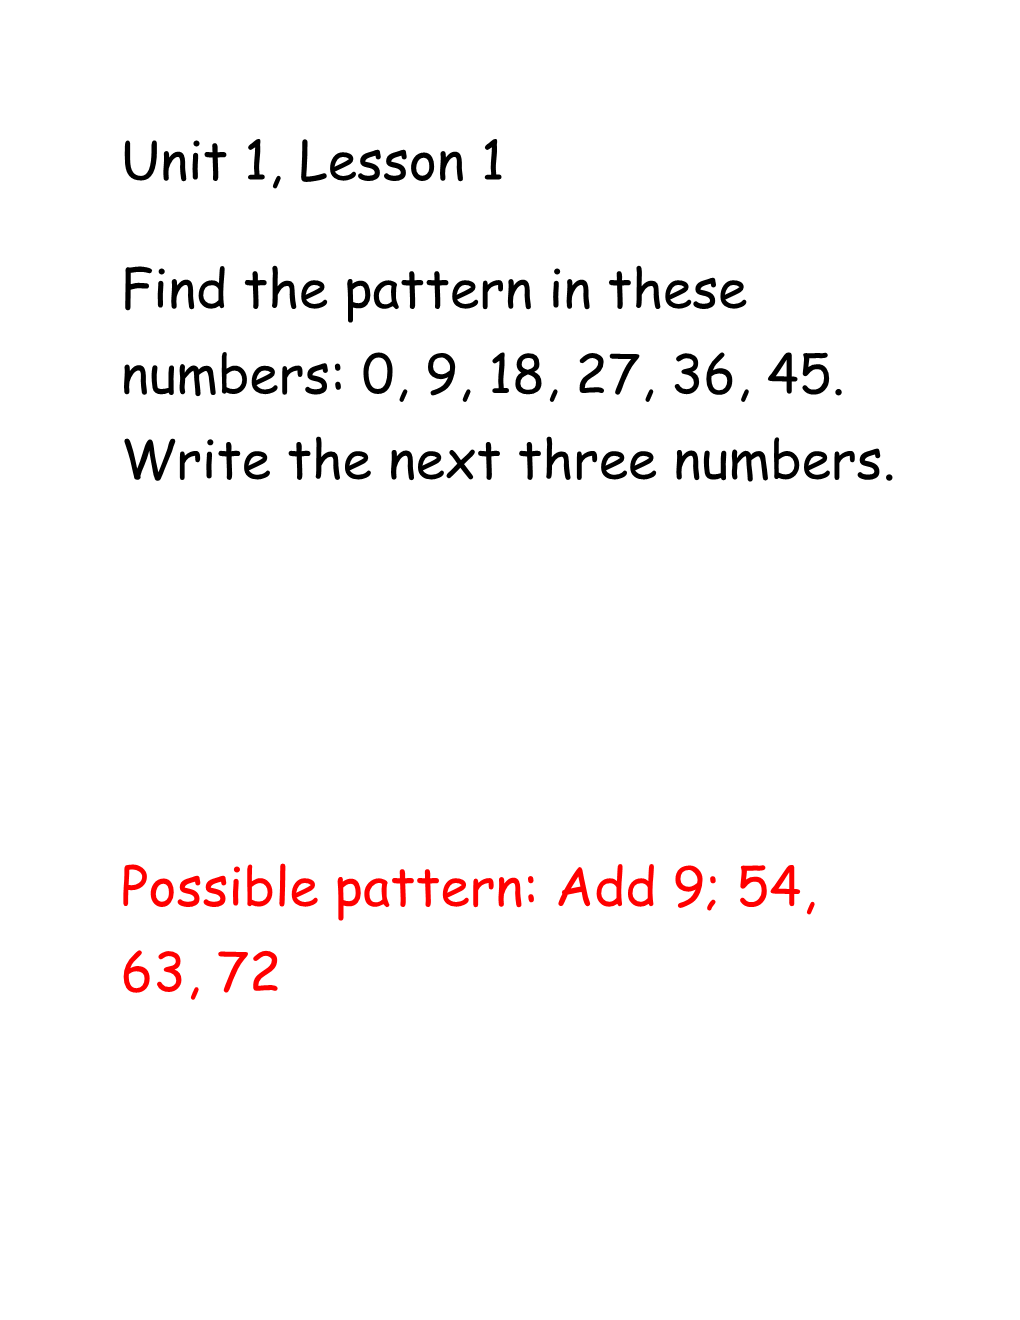 Find the Pattern in These Numbers: 0, 9, 18, 27, 36, 45